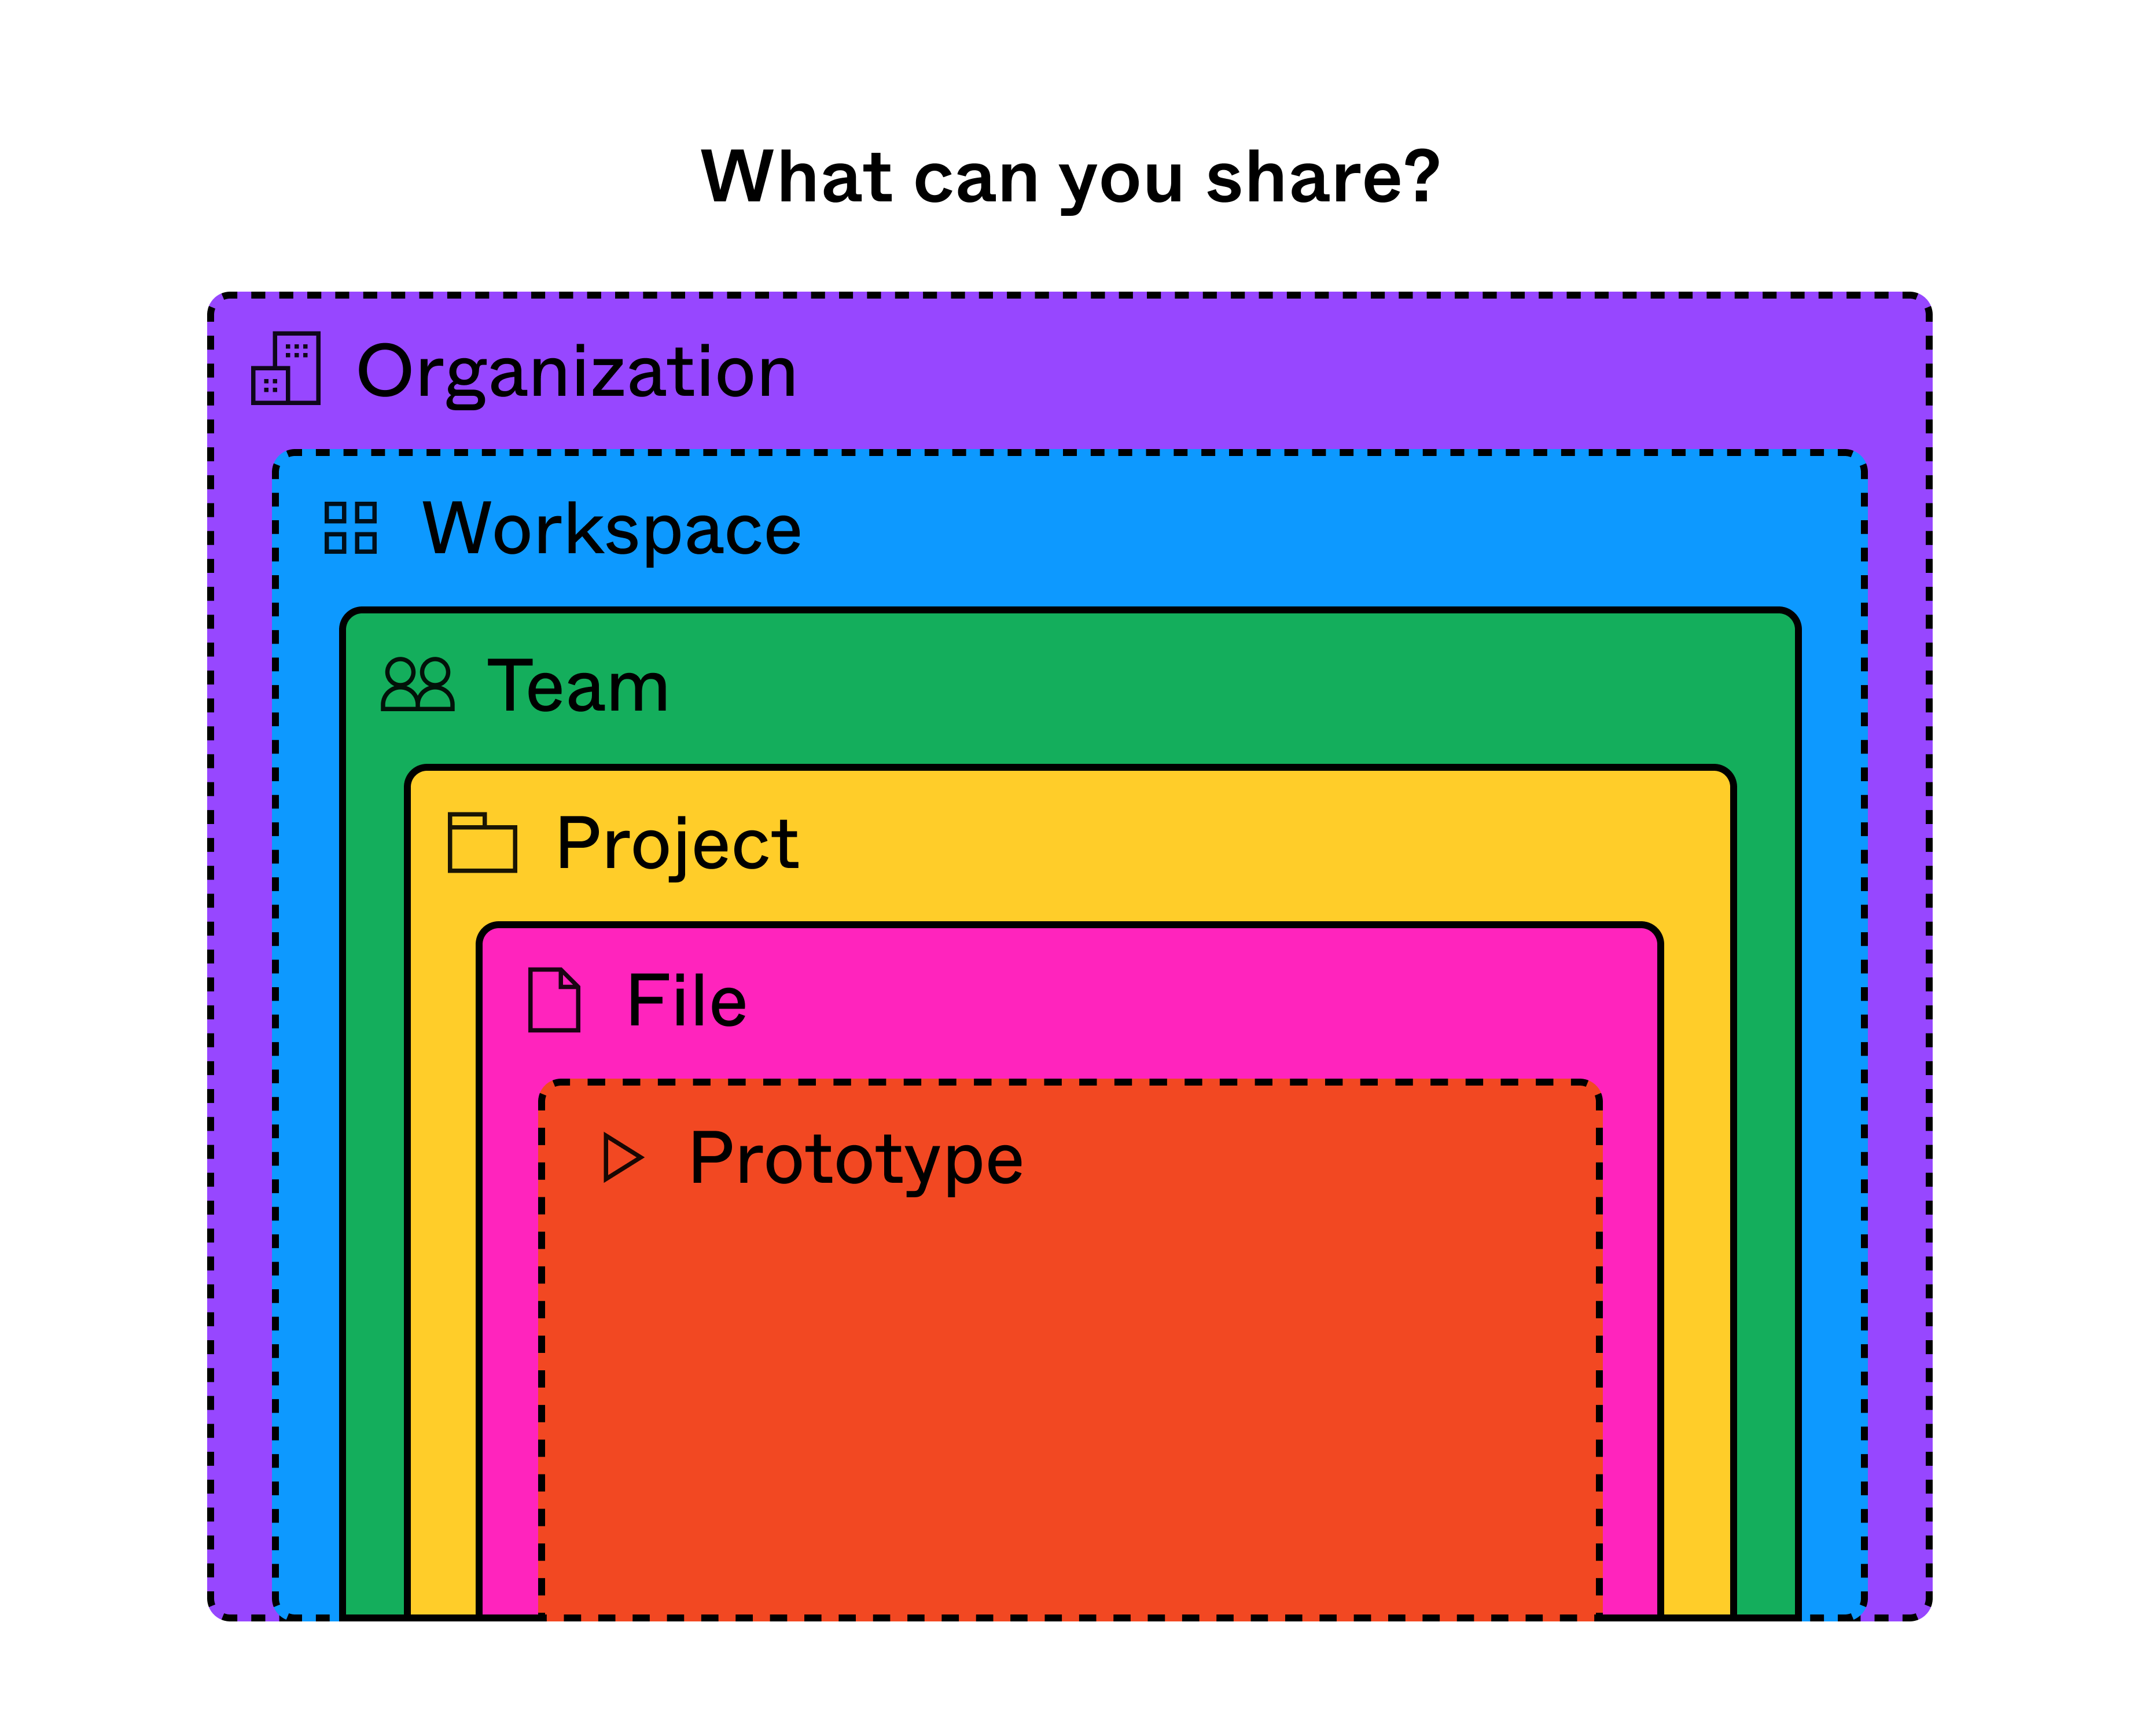 Depending on your plan, you can share at an organization, workspace, team, project, file, or prototype level